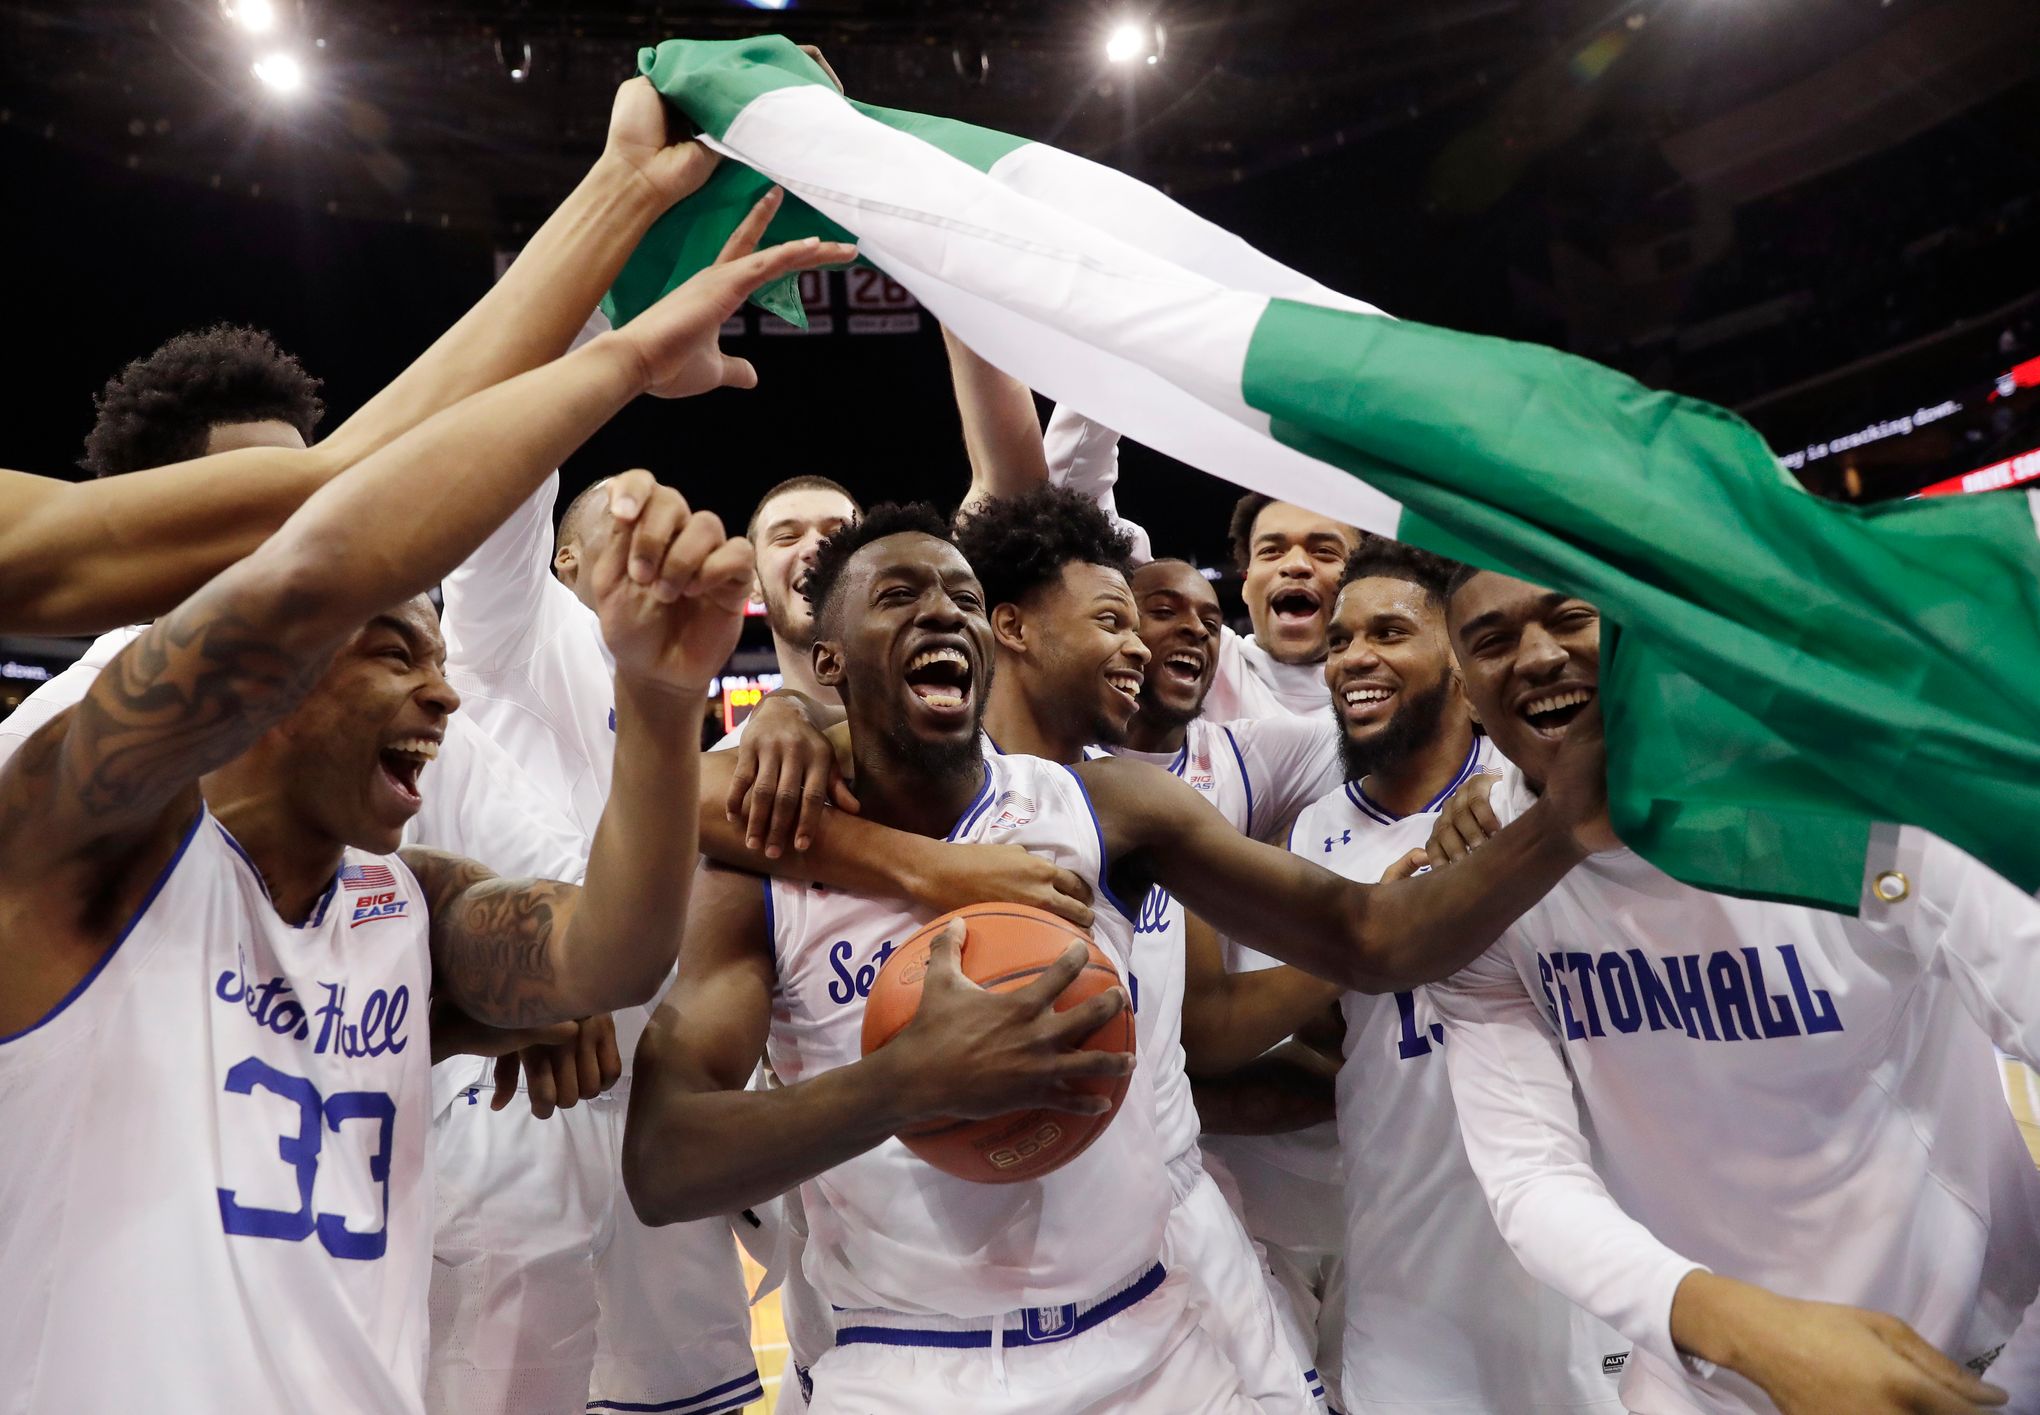 Seton Hall Pirates: It's now or never for Myles Powell